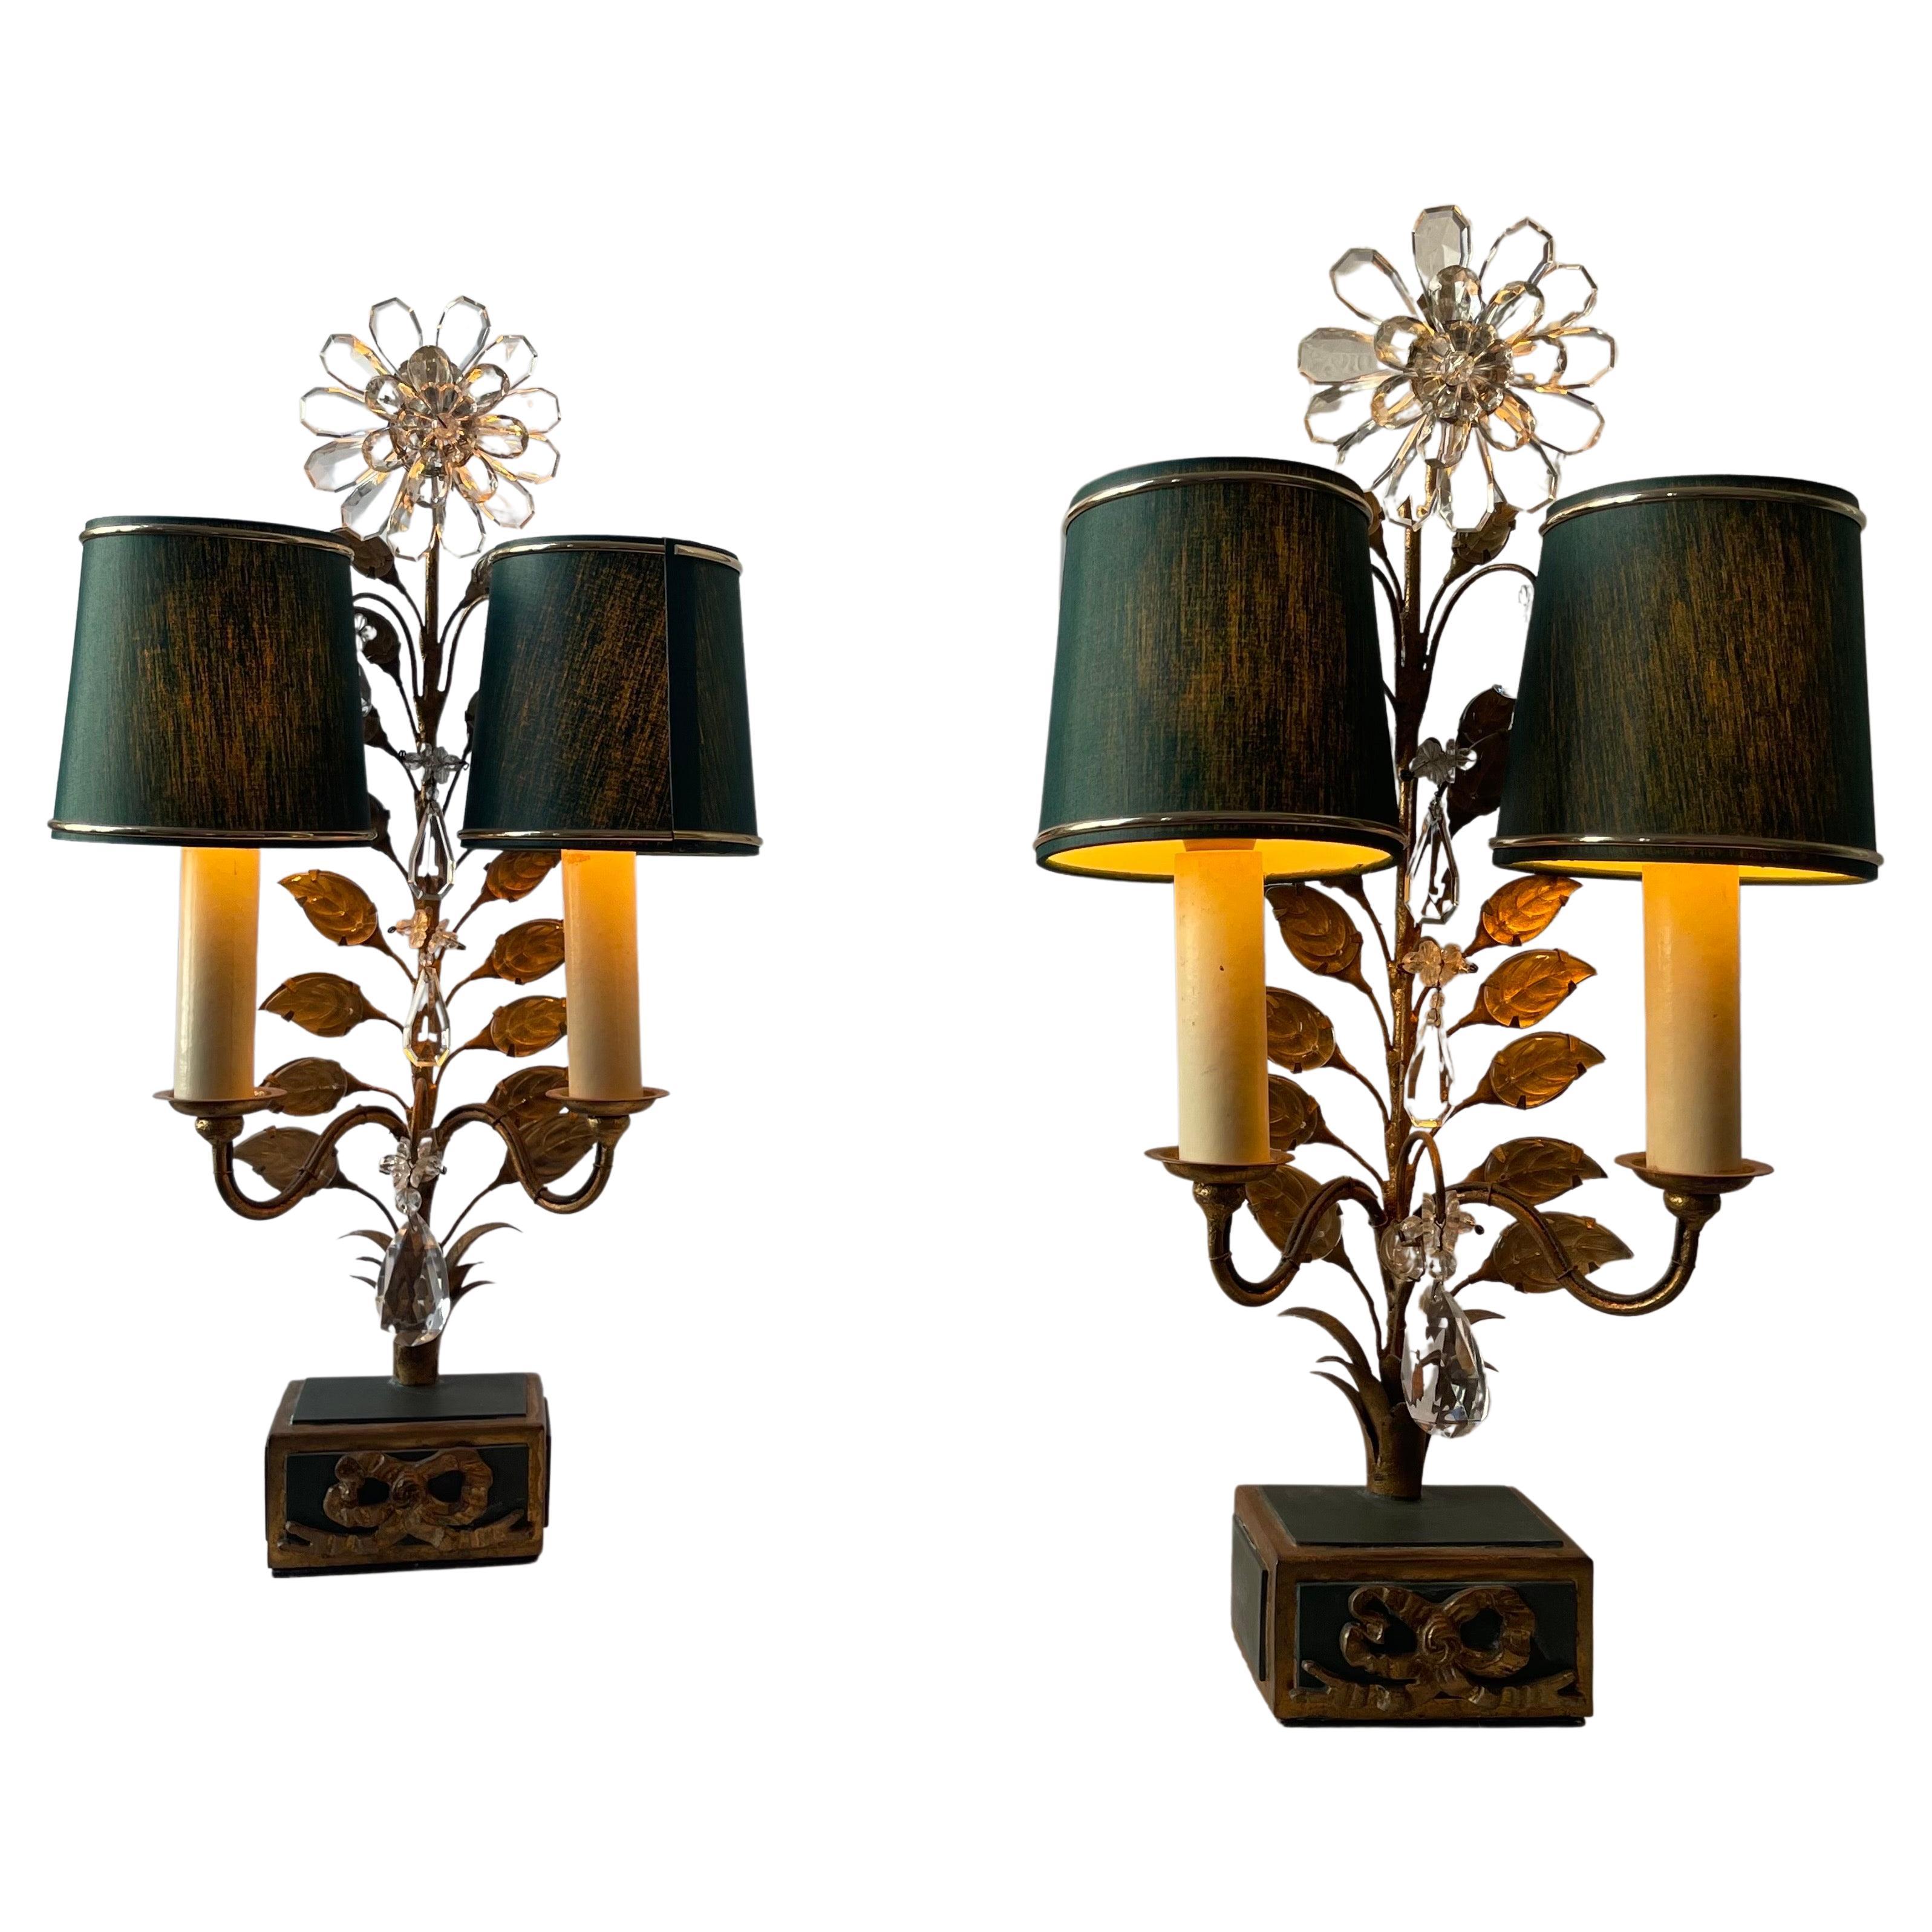 A beautiful pair of gilt iron and crystal table lamps attr. to Maison Baguès, Paris, circa 1930s.
Socket: each two x E14 for standard screw bulbs.
Newly rewired with a dimmer.
In an excellent condition.

